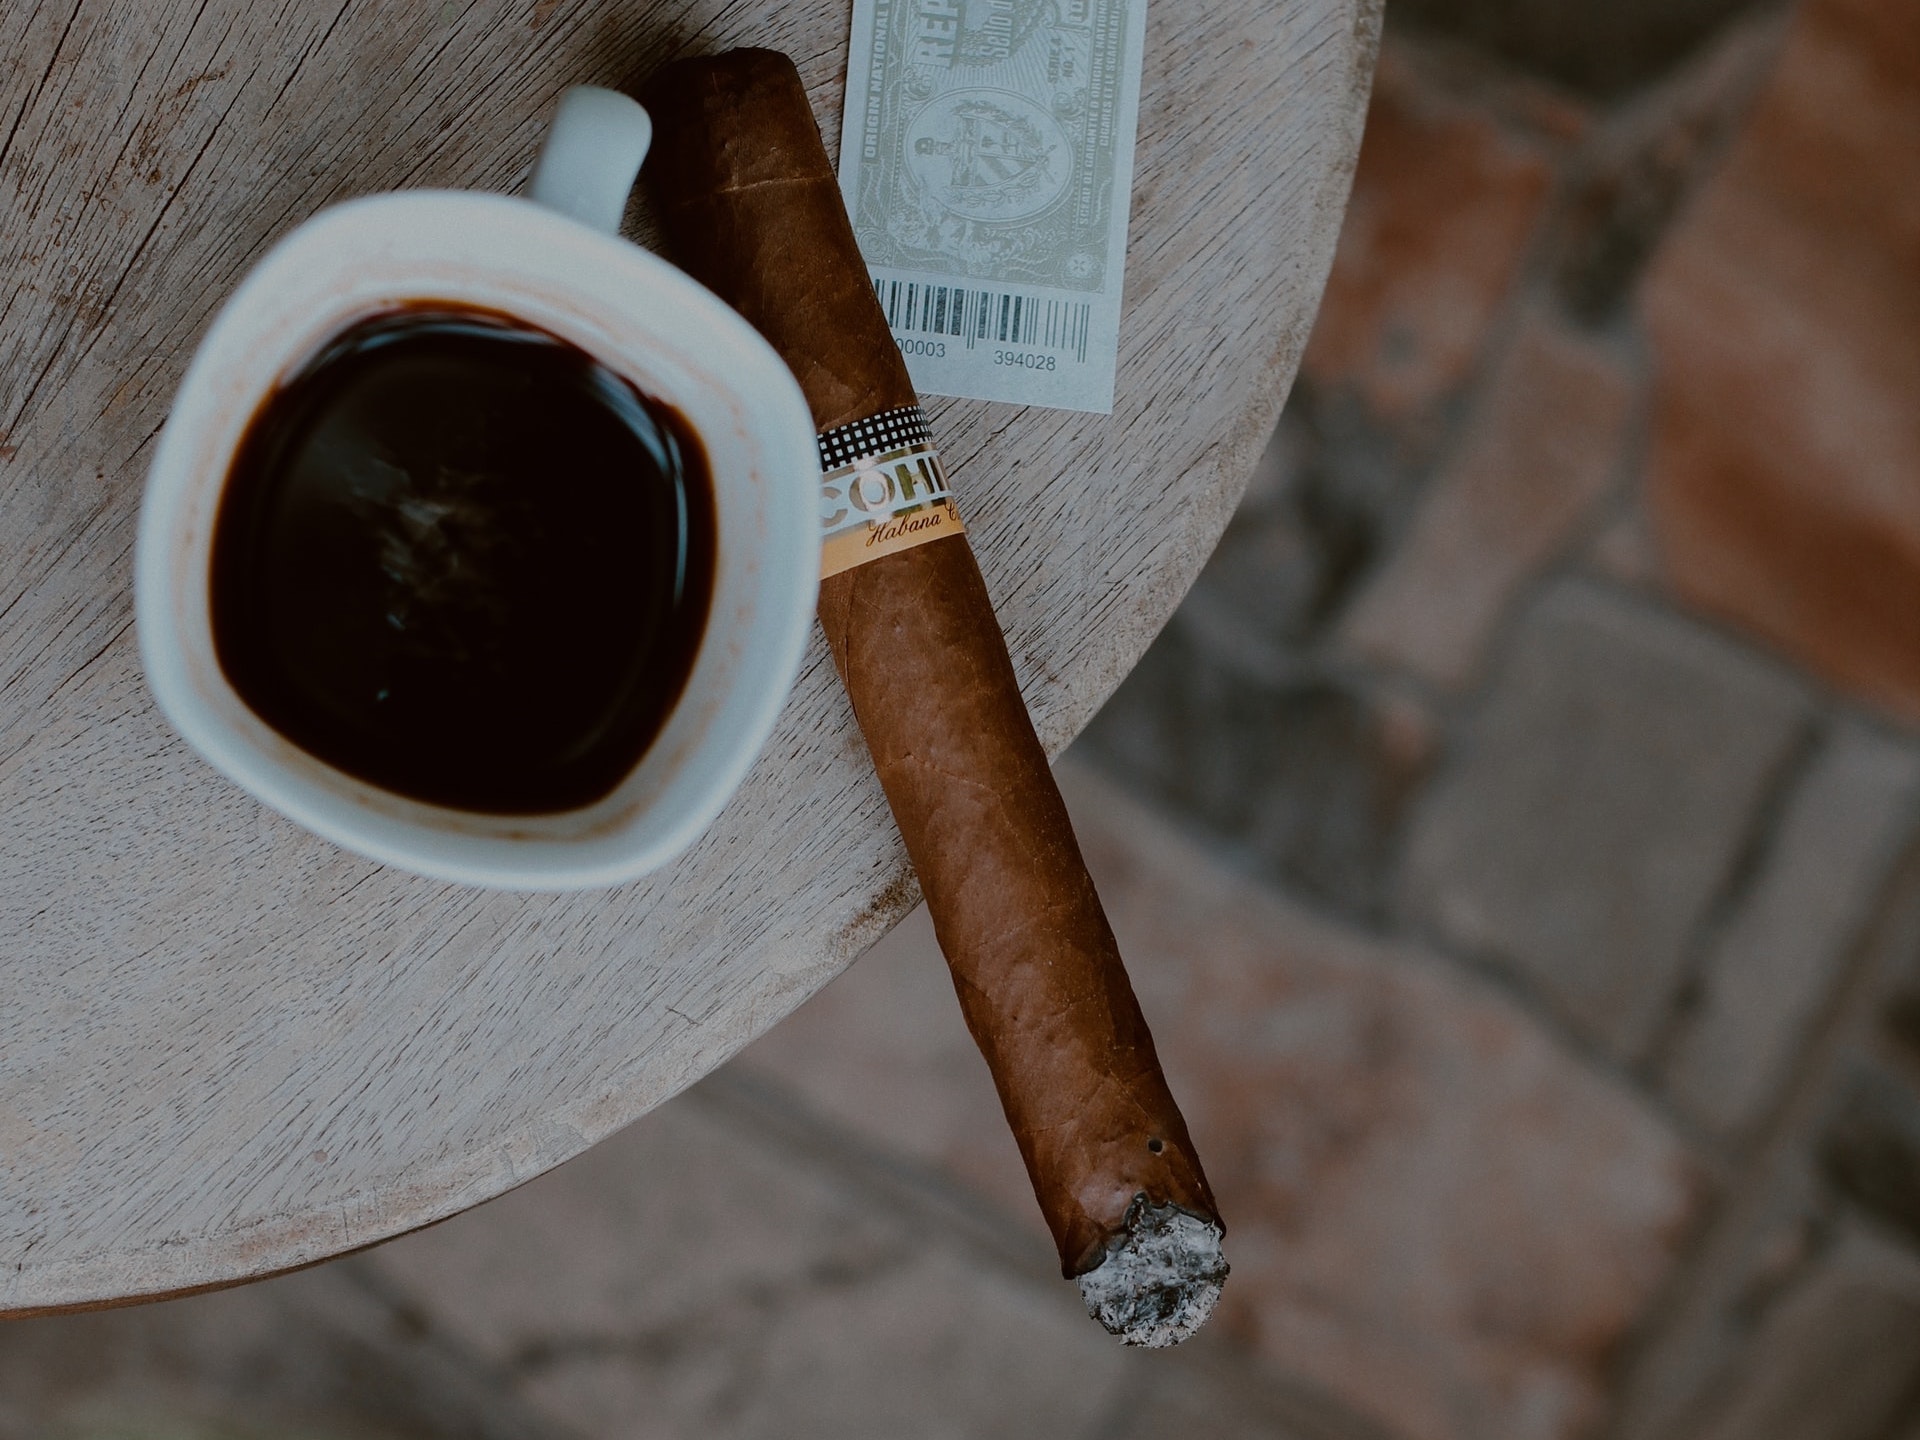 cohiba cigar next to a cup of coffee